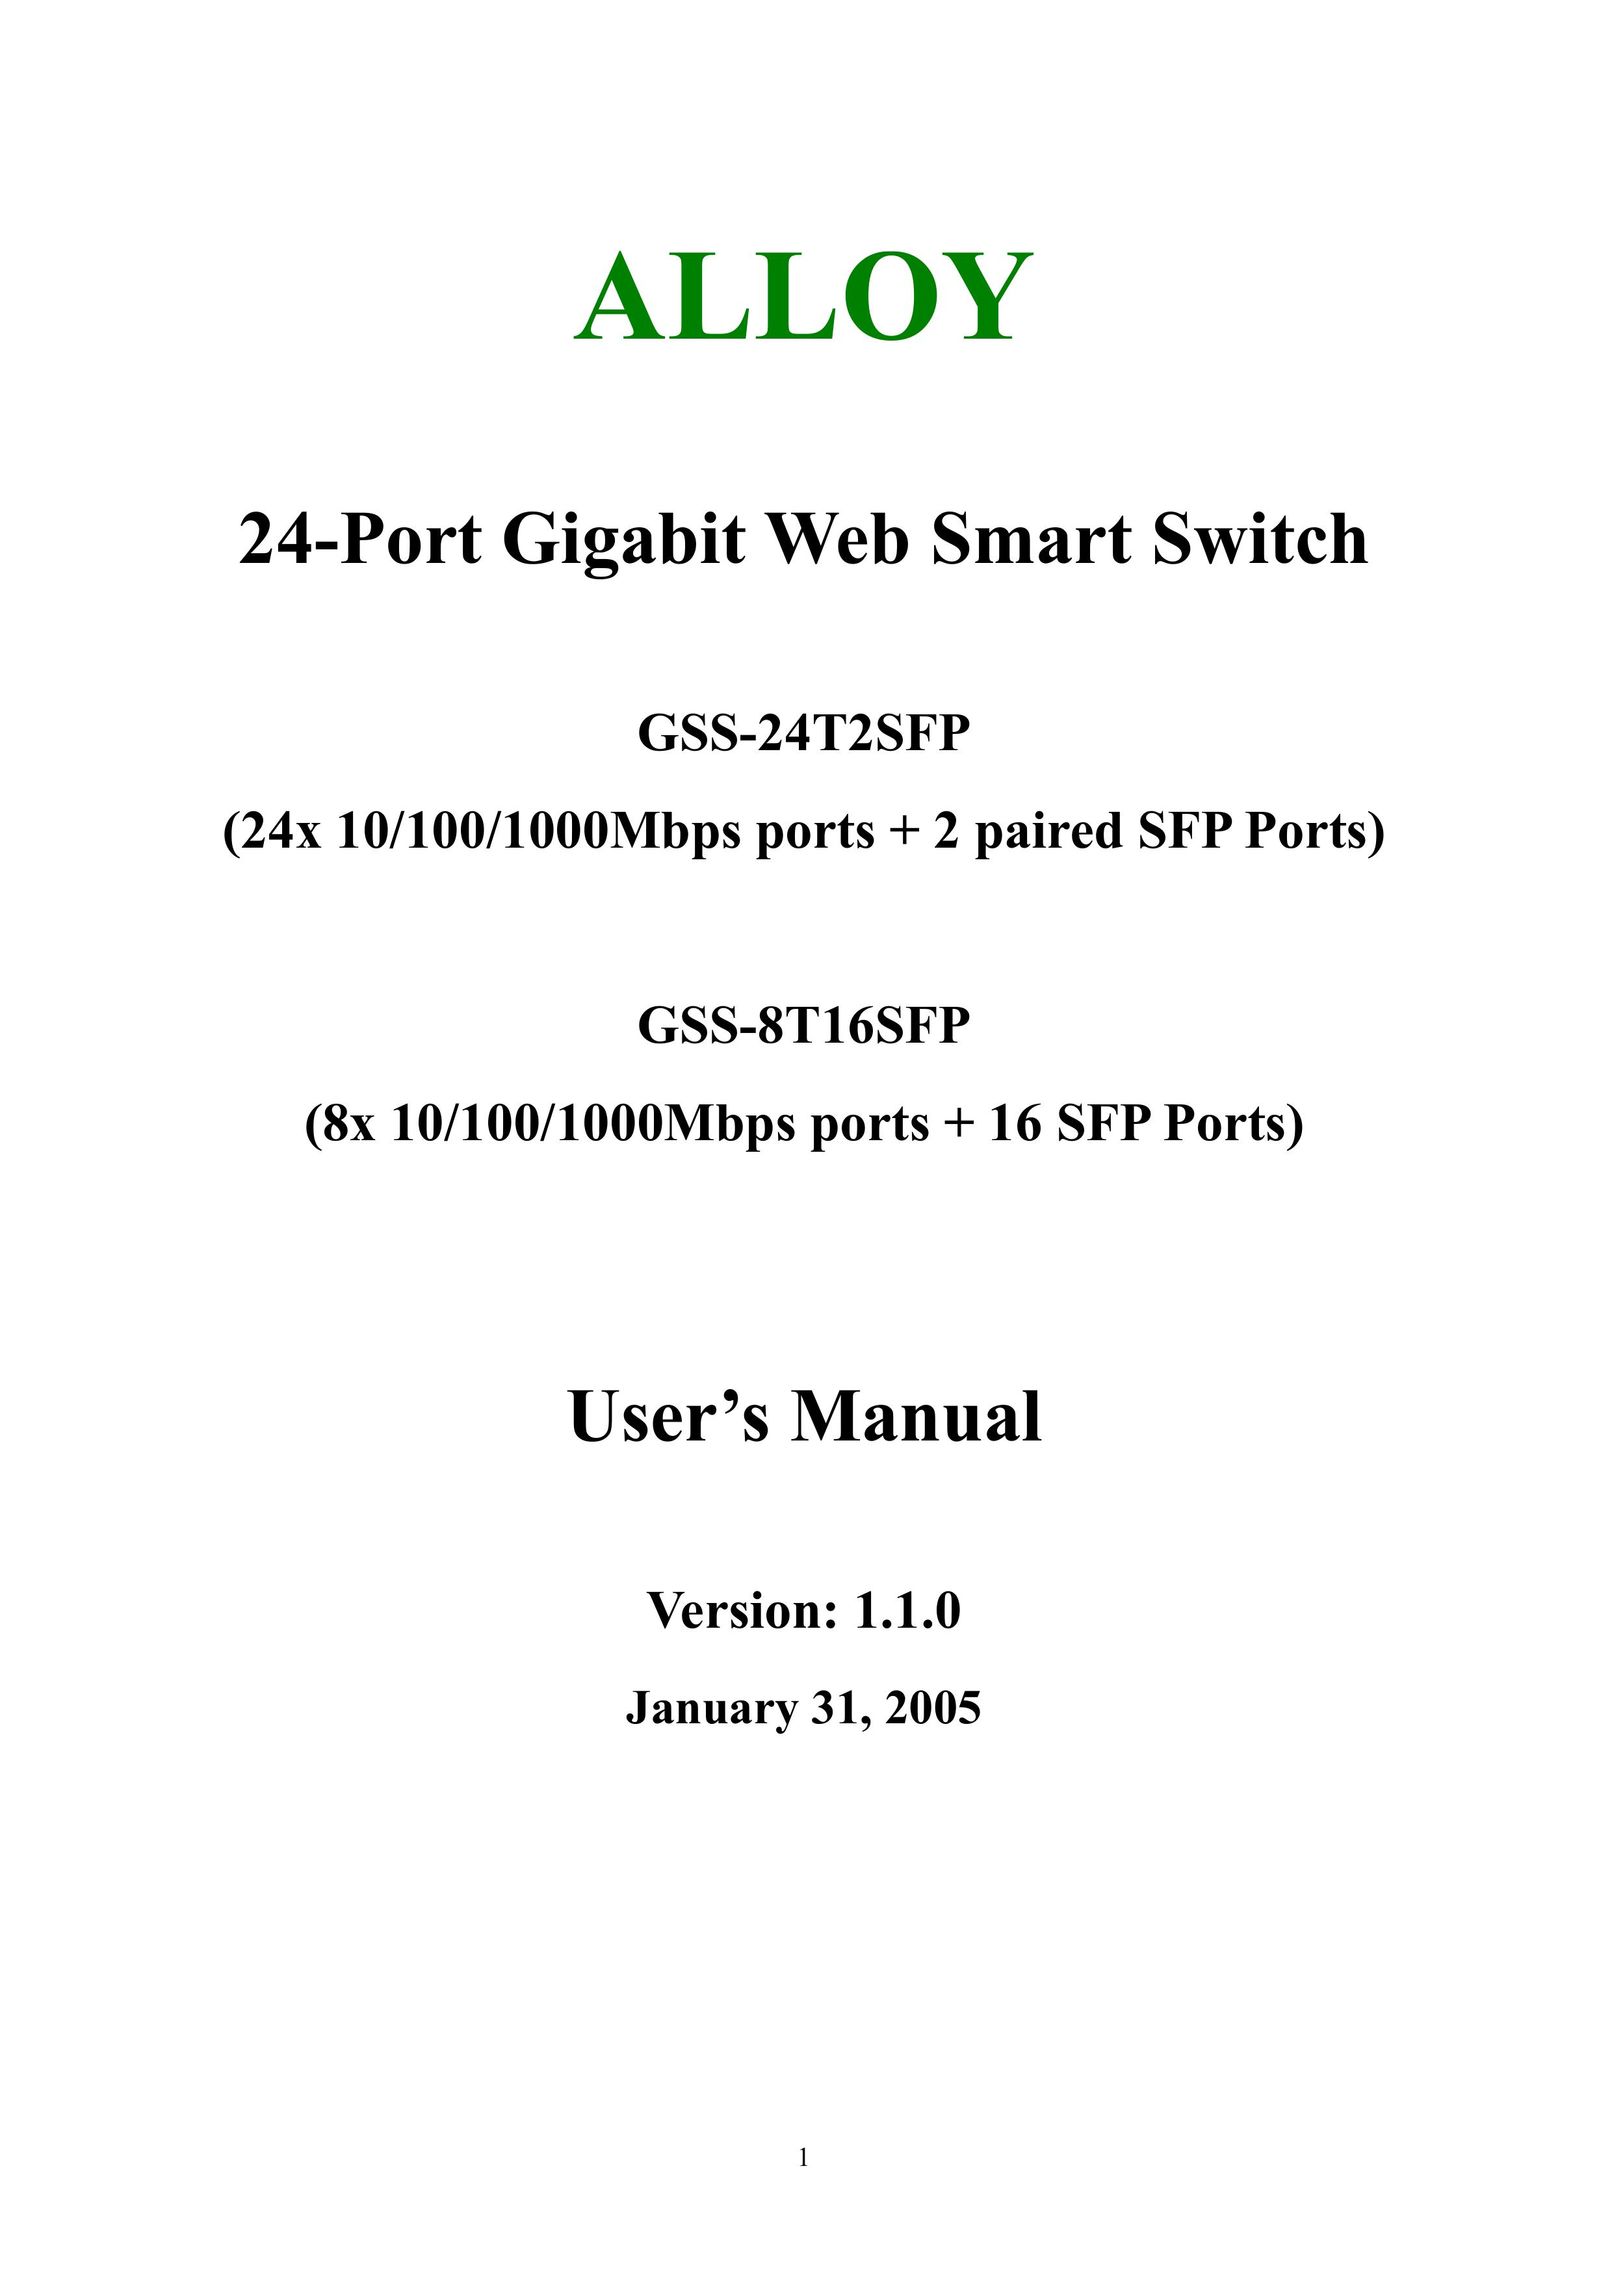 Alloy Computer Products GSS-24T2SFP Switch User Manual